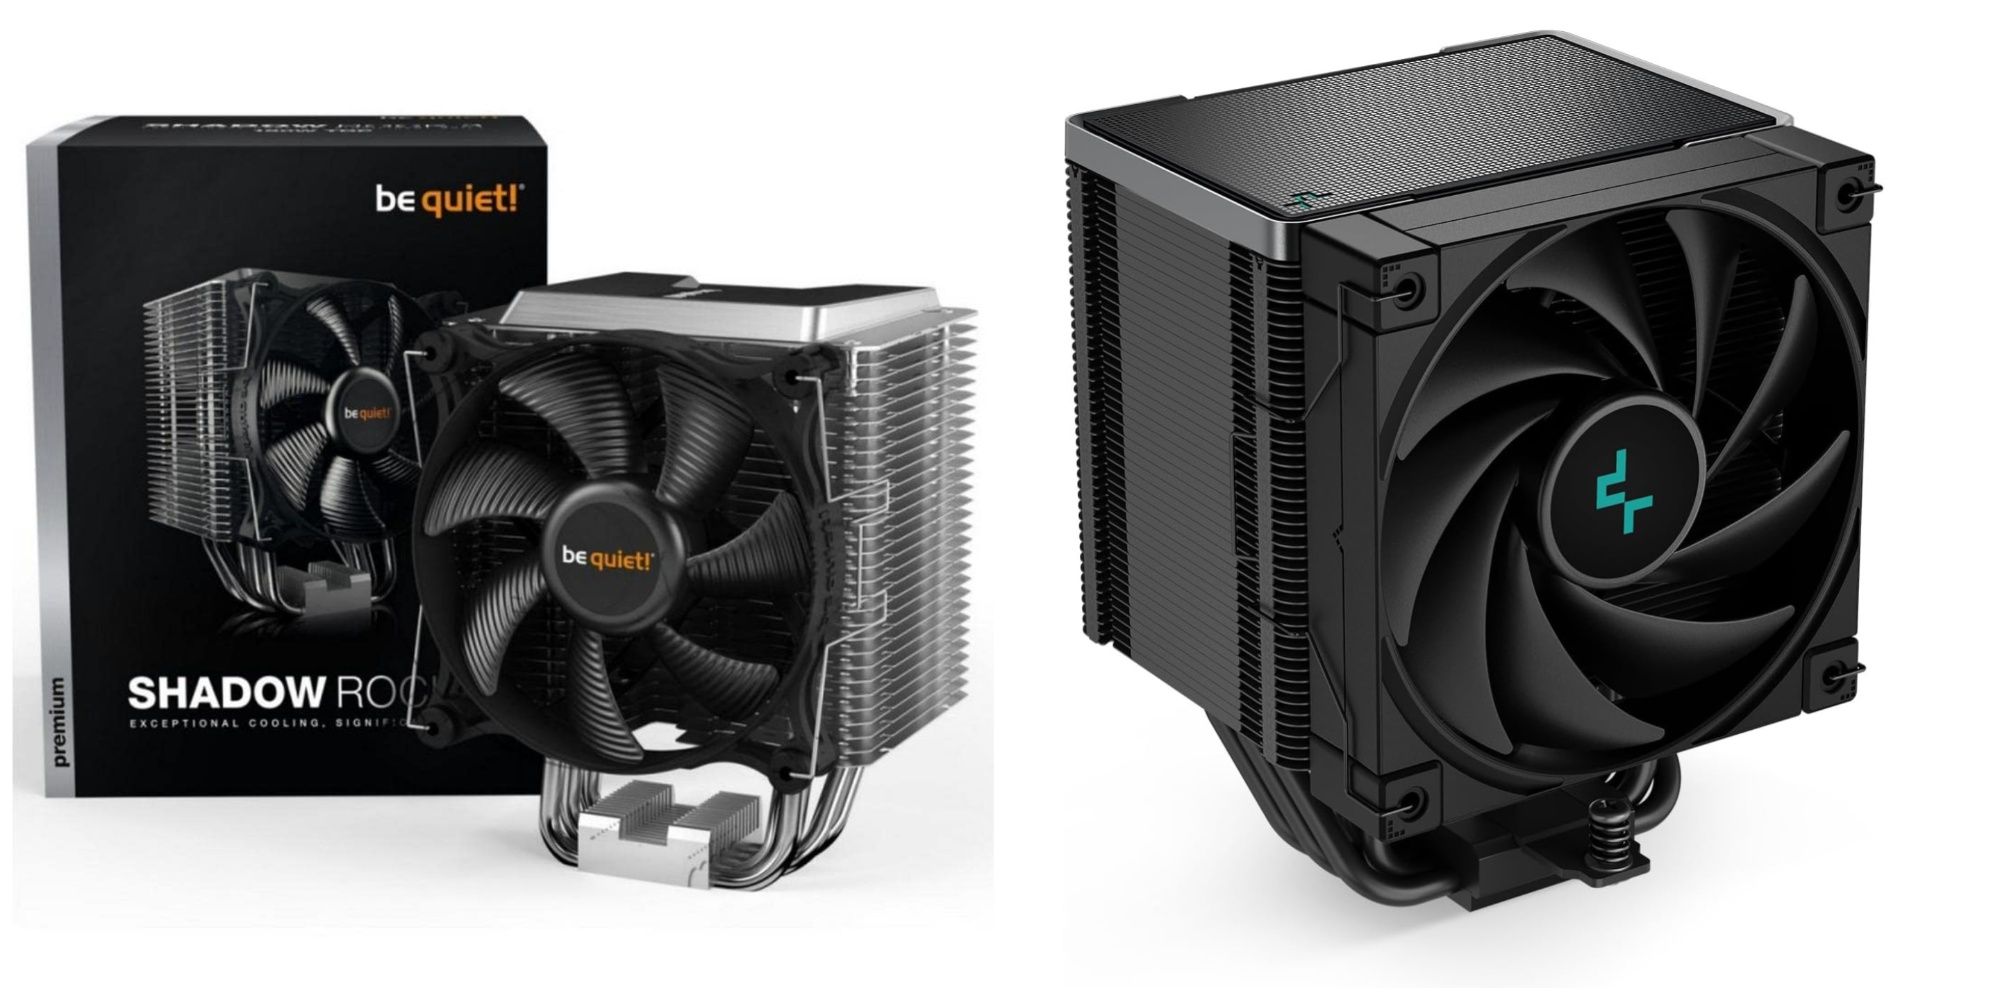 Two air CPU coolers, with a be quiet! on the left and a DeepCool on the right. Both are black block-style coolers.